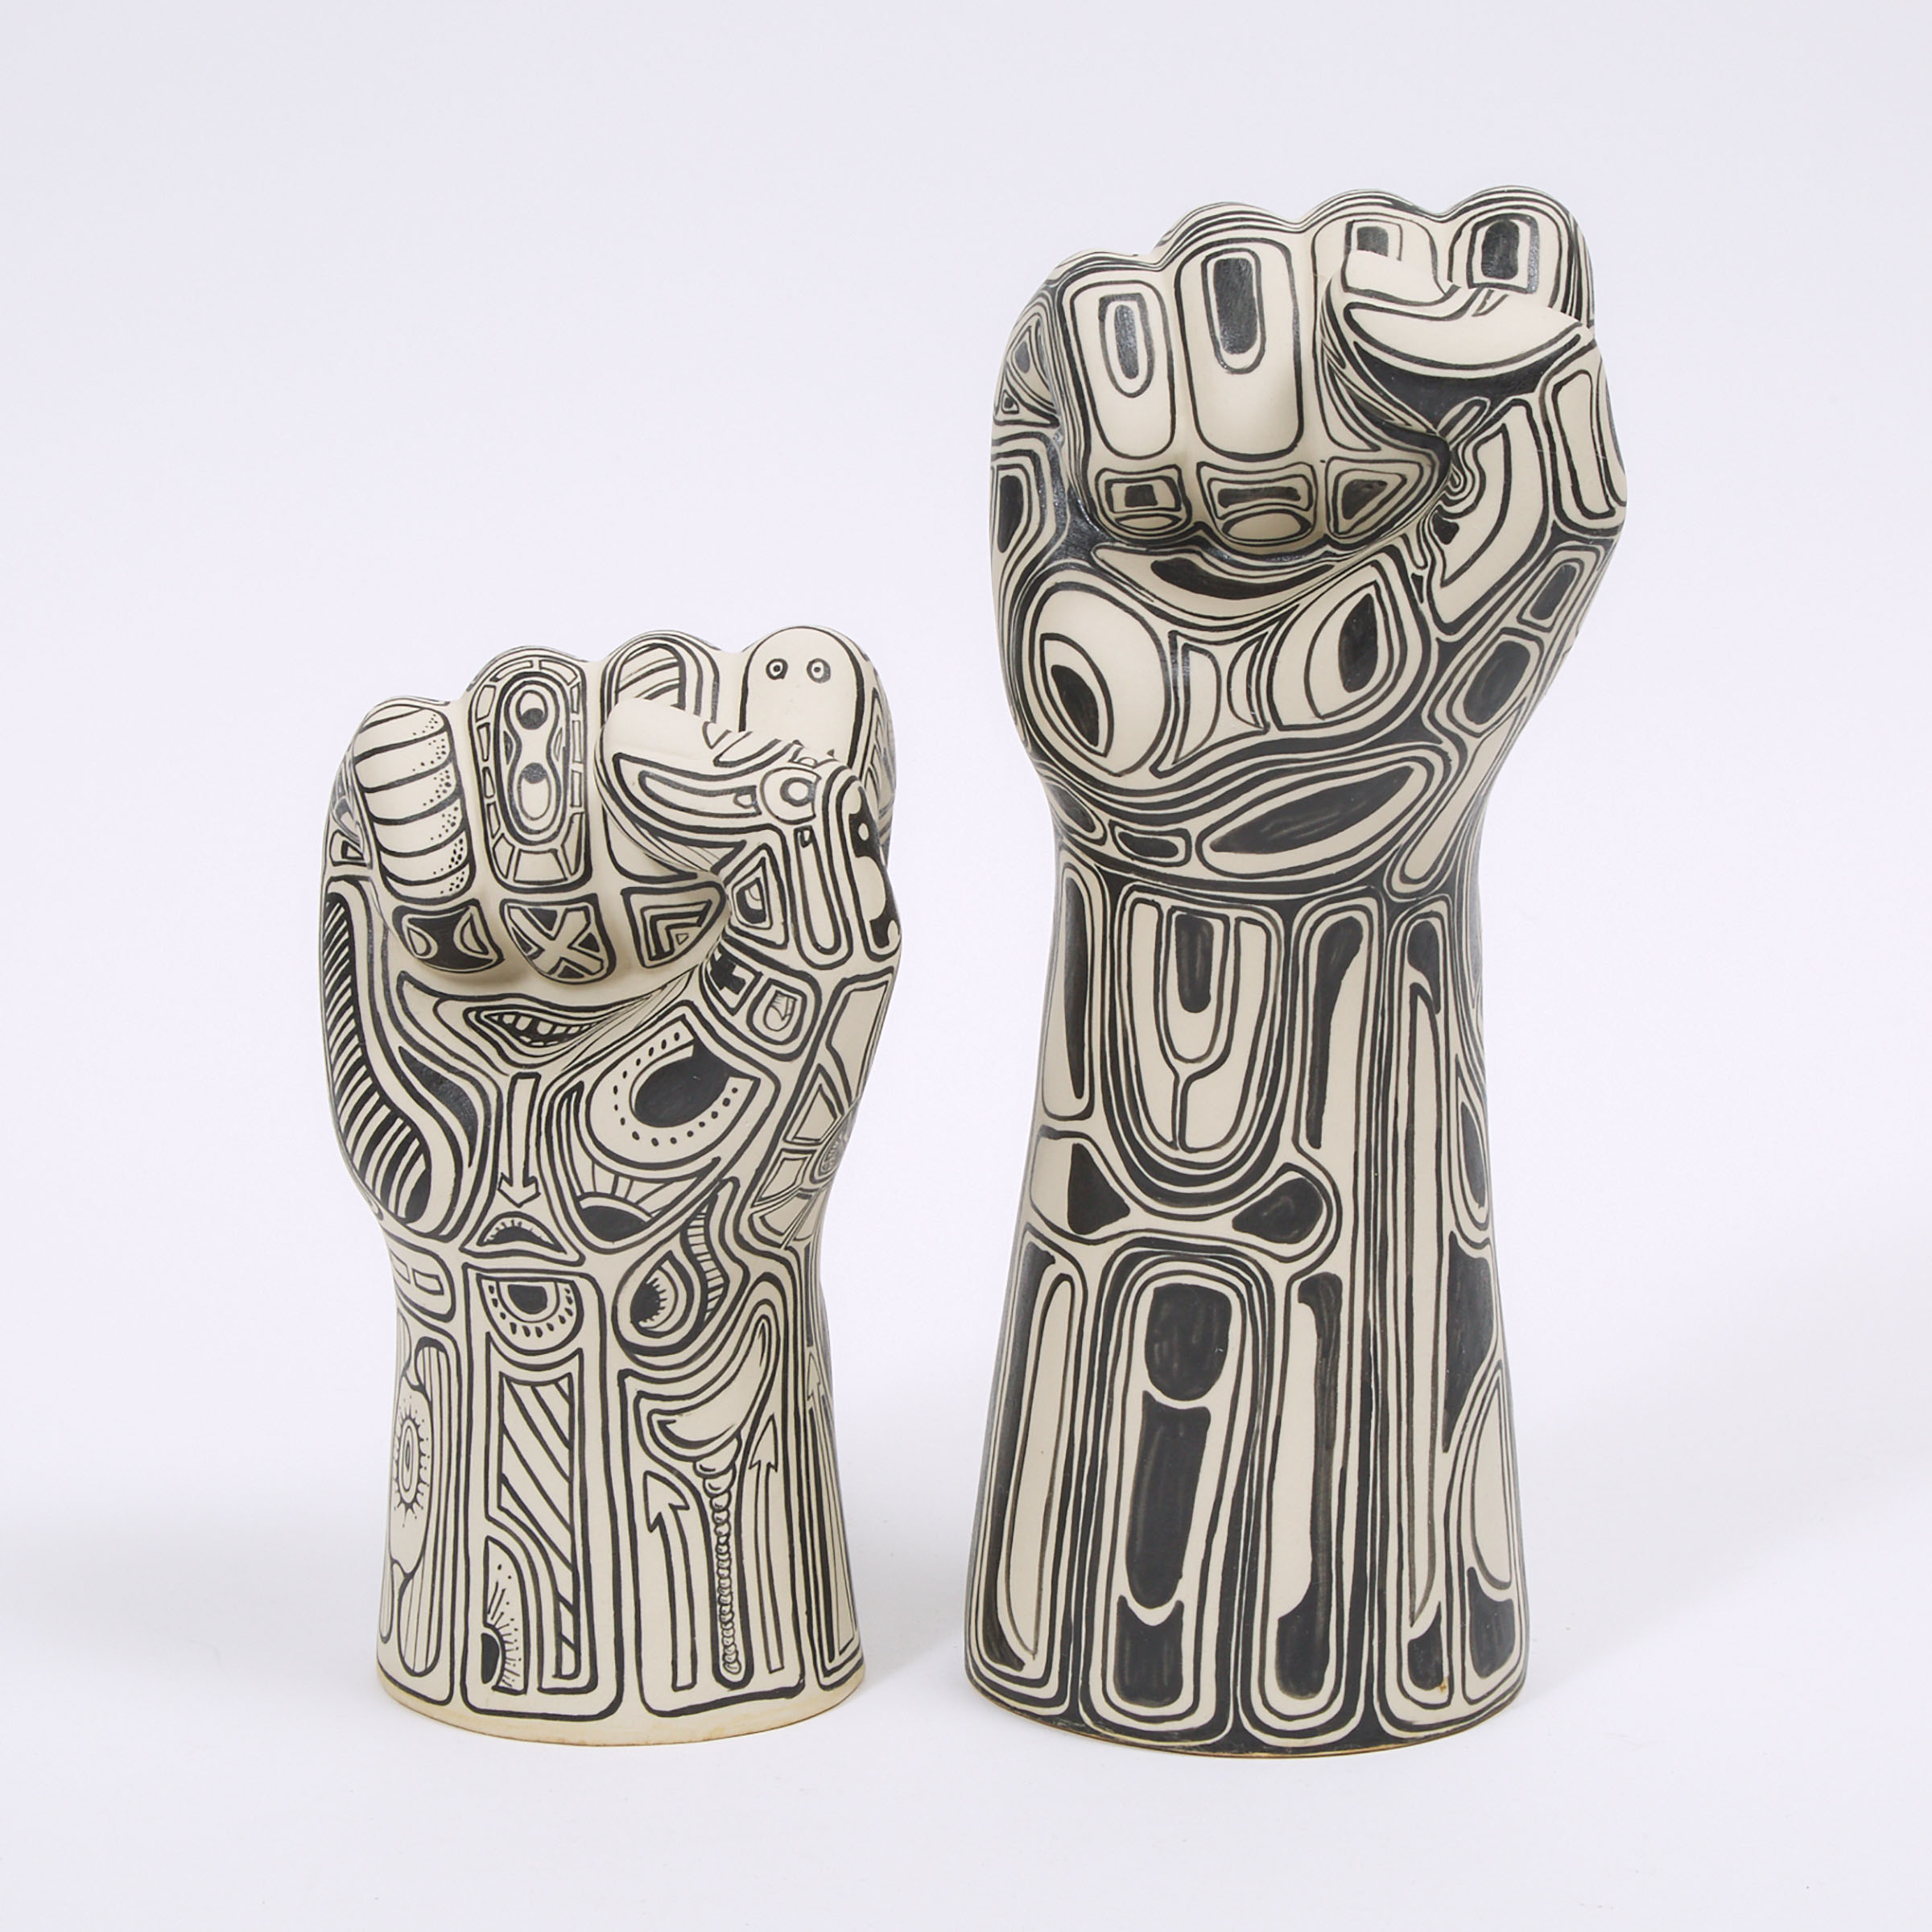 Two First Nations School 'Tattooed' Ceramic Fists, 20th/early 21st century